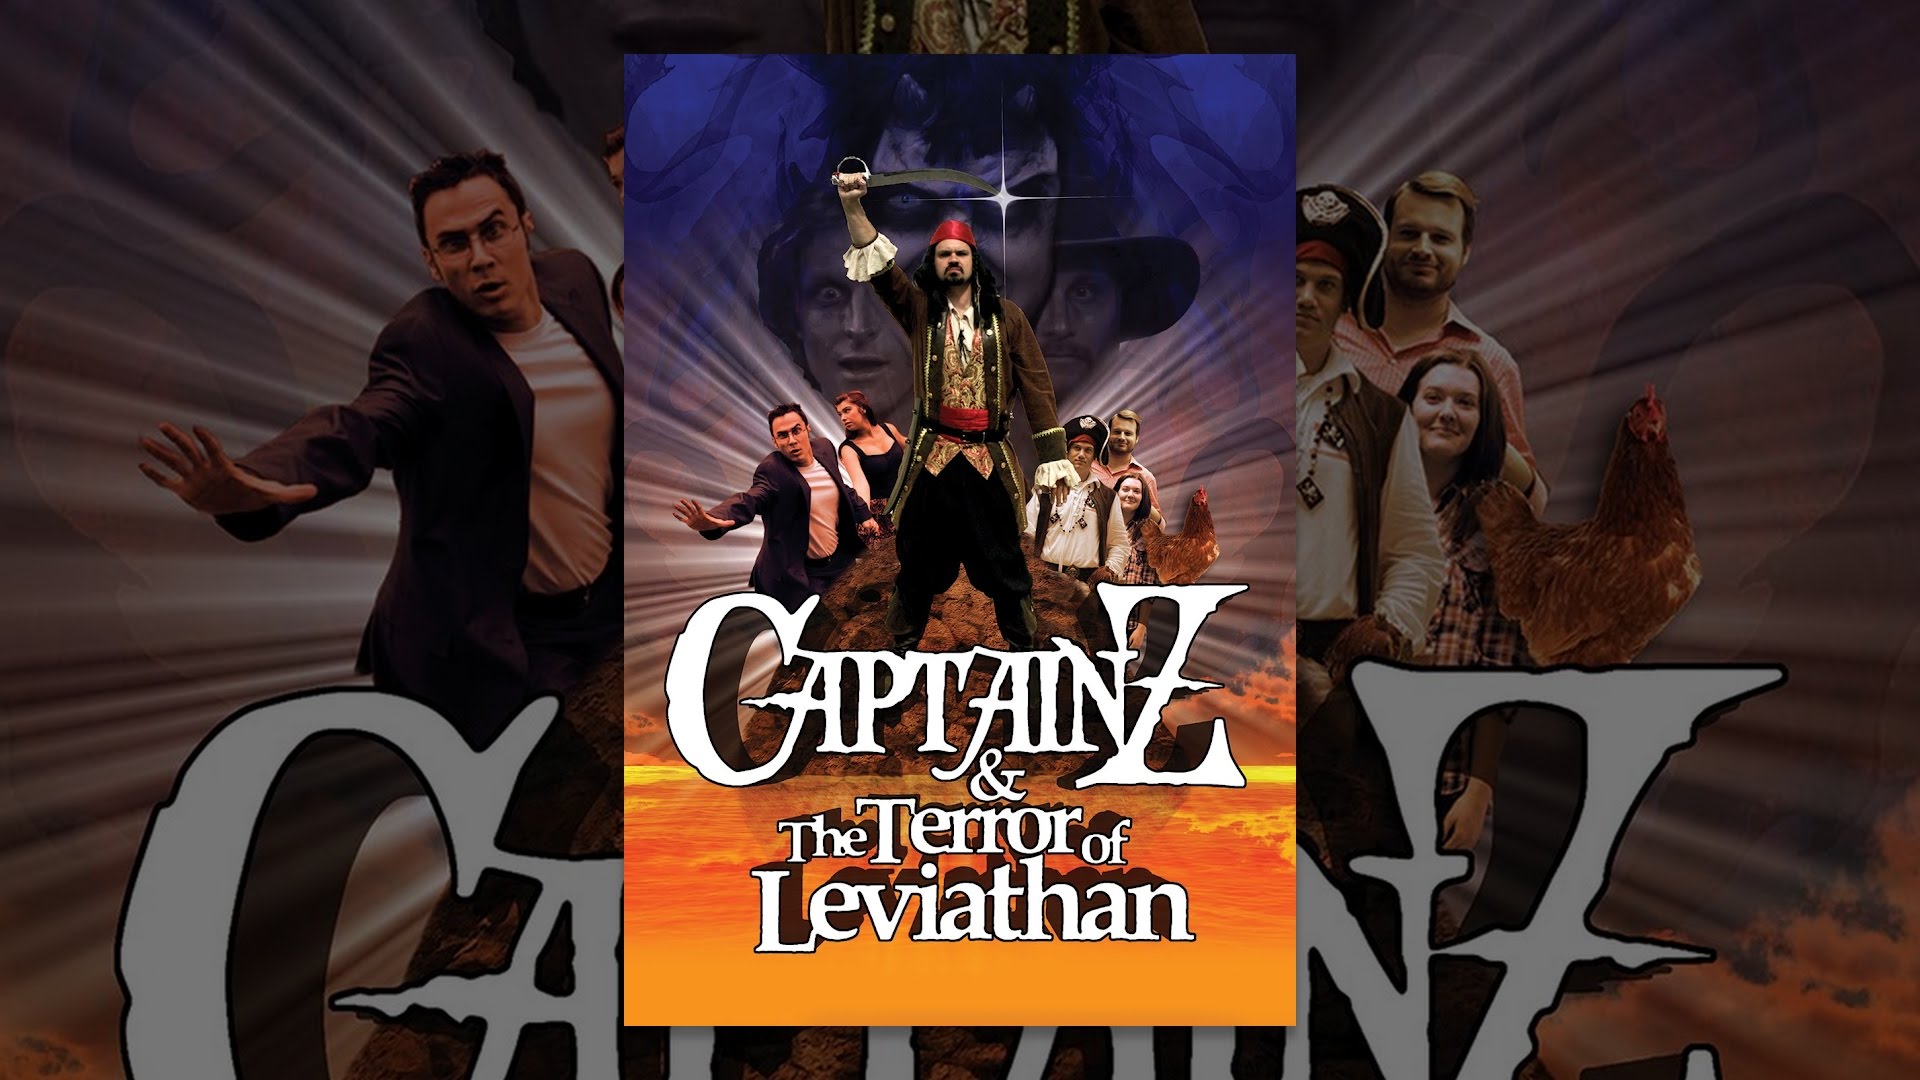 Download Captain Z & the Terror of Leviathan